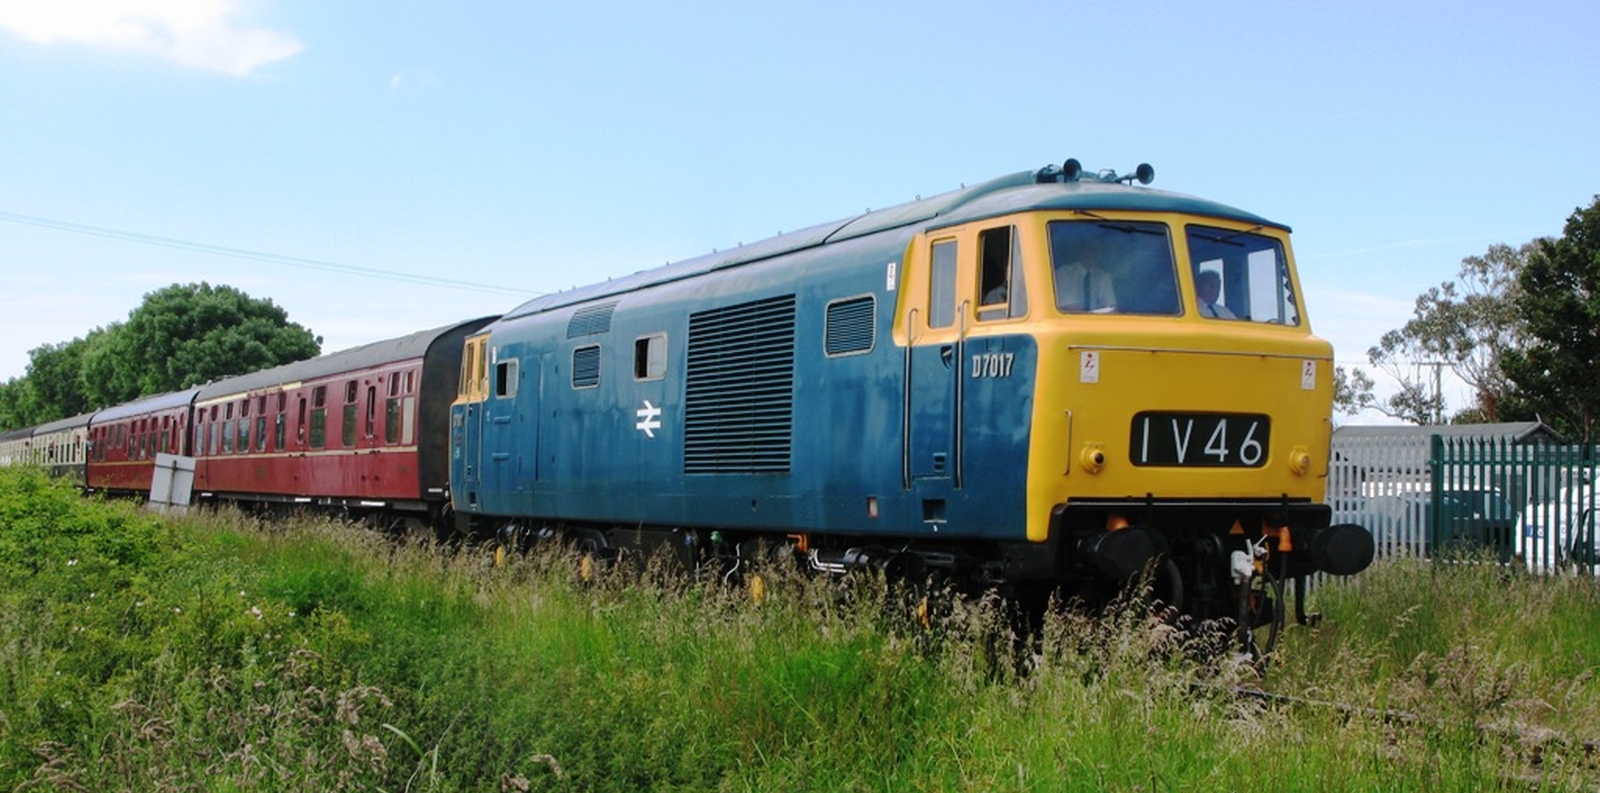 Preserved D7017 in June 2009 on the West Somerset Railway